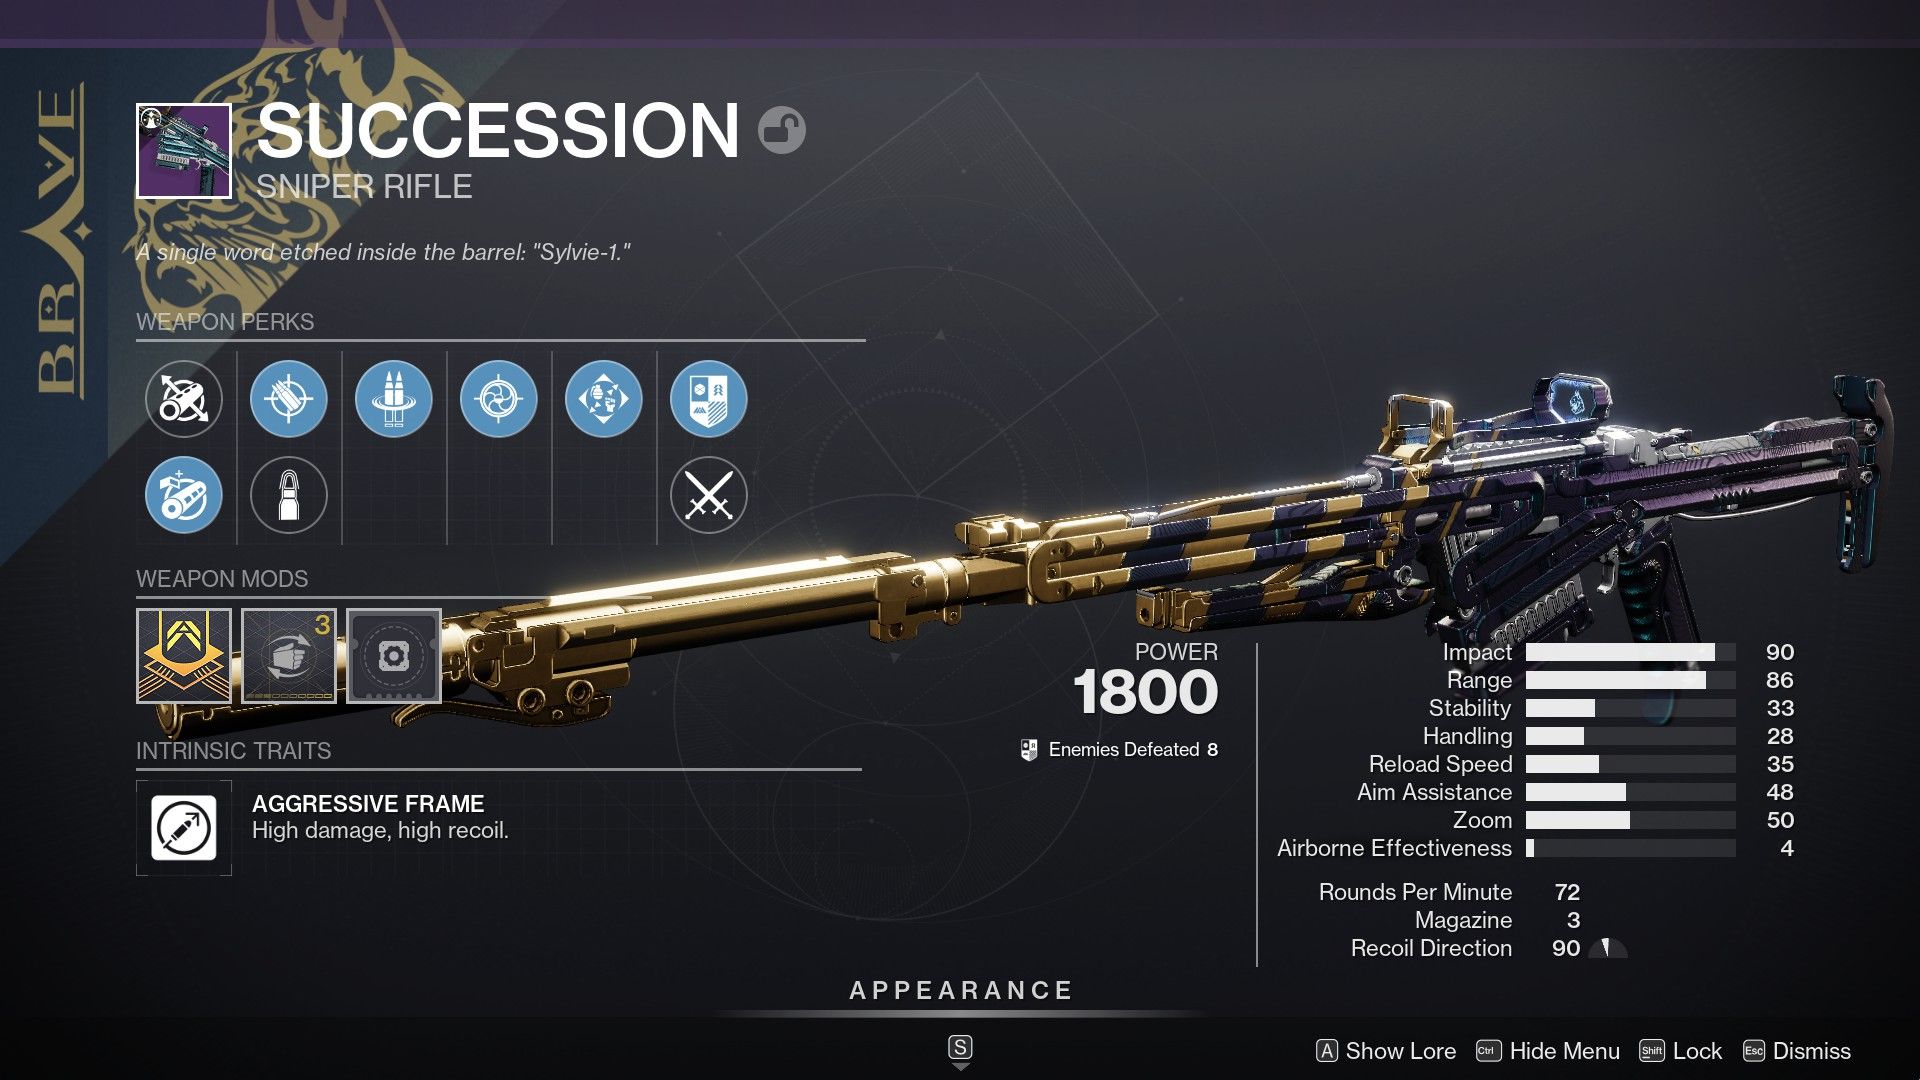 Brave arsenal variant of the Succession rifle in Destiny 2